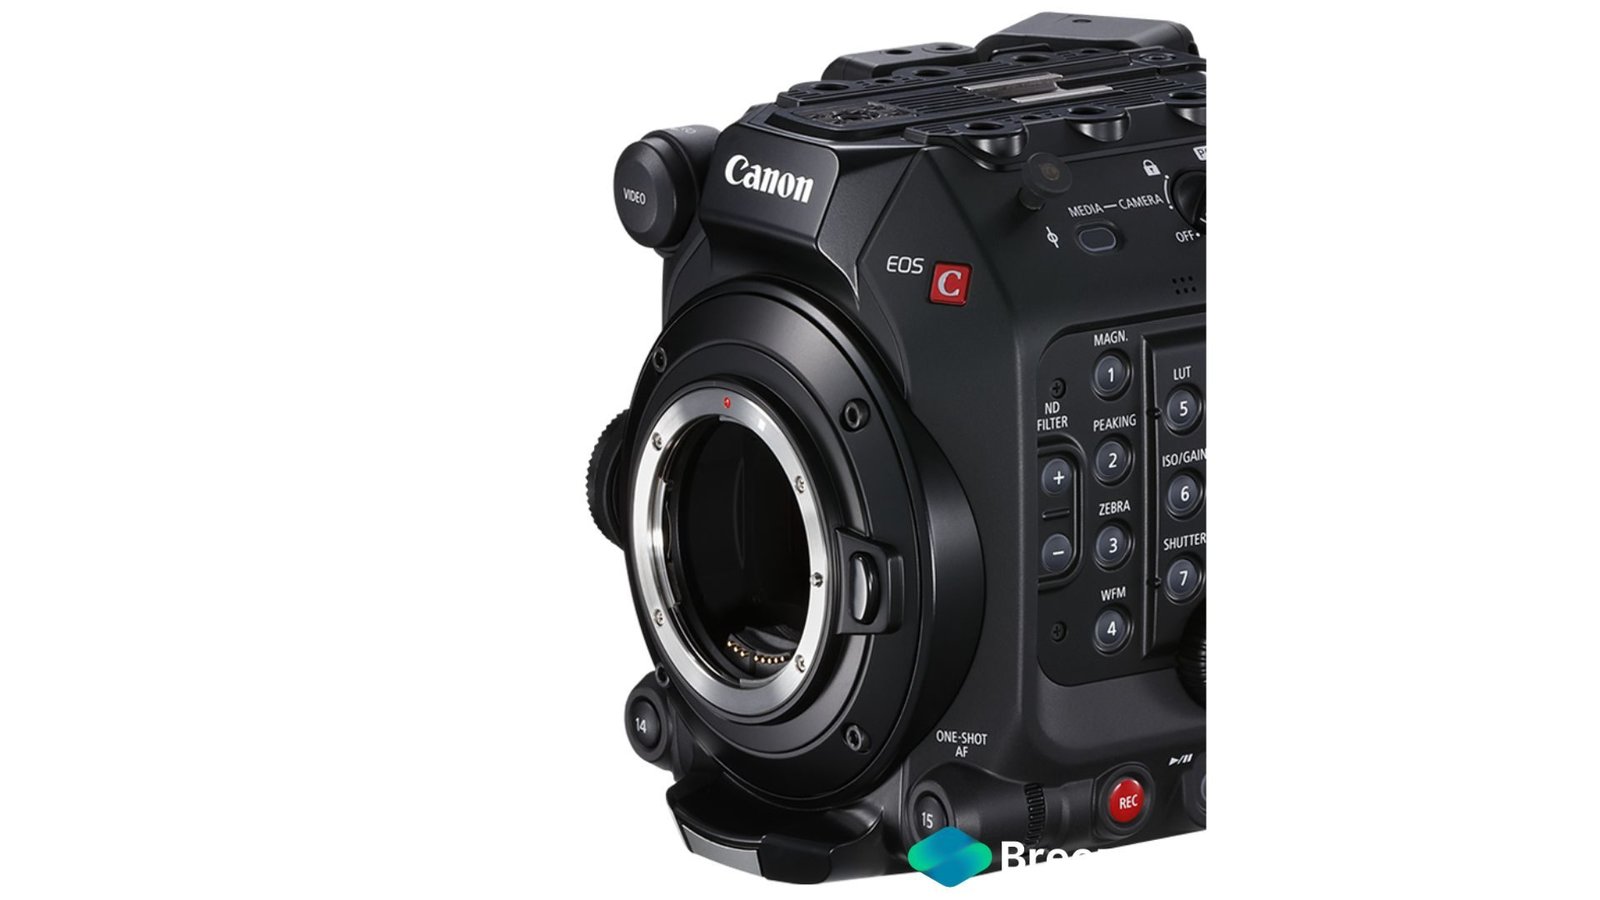 Rent Canon C-300 Mark III Camera with Cp.2 Lens Kit in Delhi NCR, Rent Canon EOS R-5 Mirror Less 8K Camera with Cp.2 Lens Kit in Delhi NCR, Camera accessories, Camera lenses for rent, in Delhi Gurgaon Noida, hire Shooting equipment, Lighting equipment rental, Film gear rental for Video production, camera rental company in Delhi, film equipment rental company